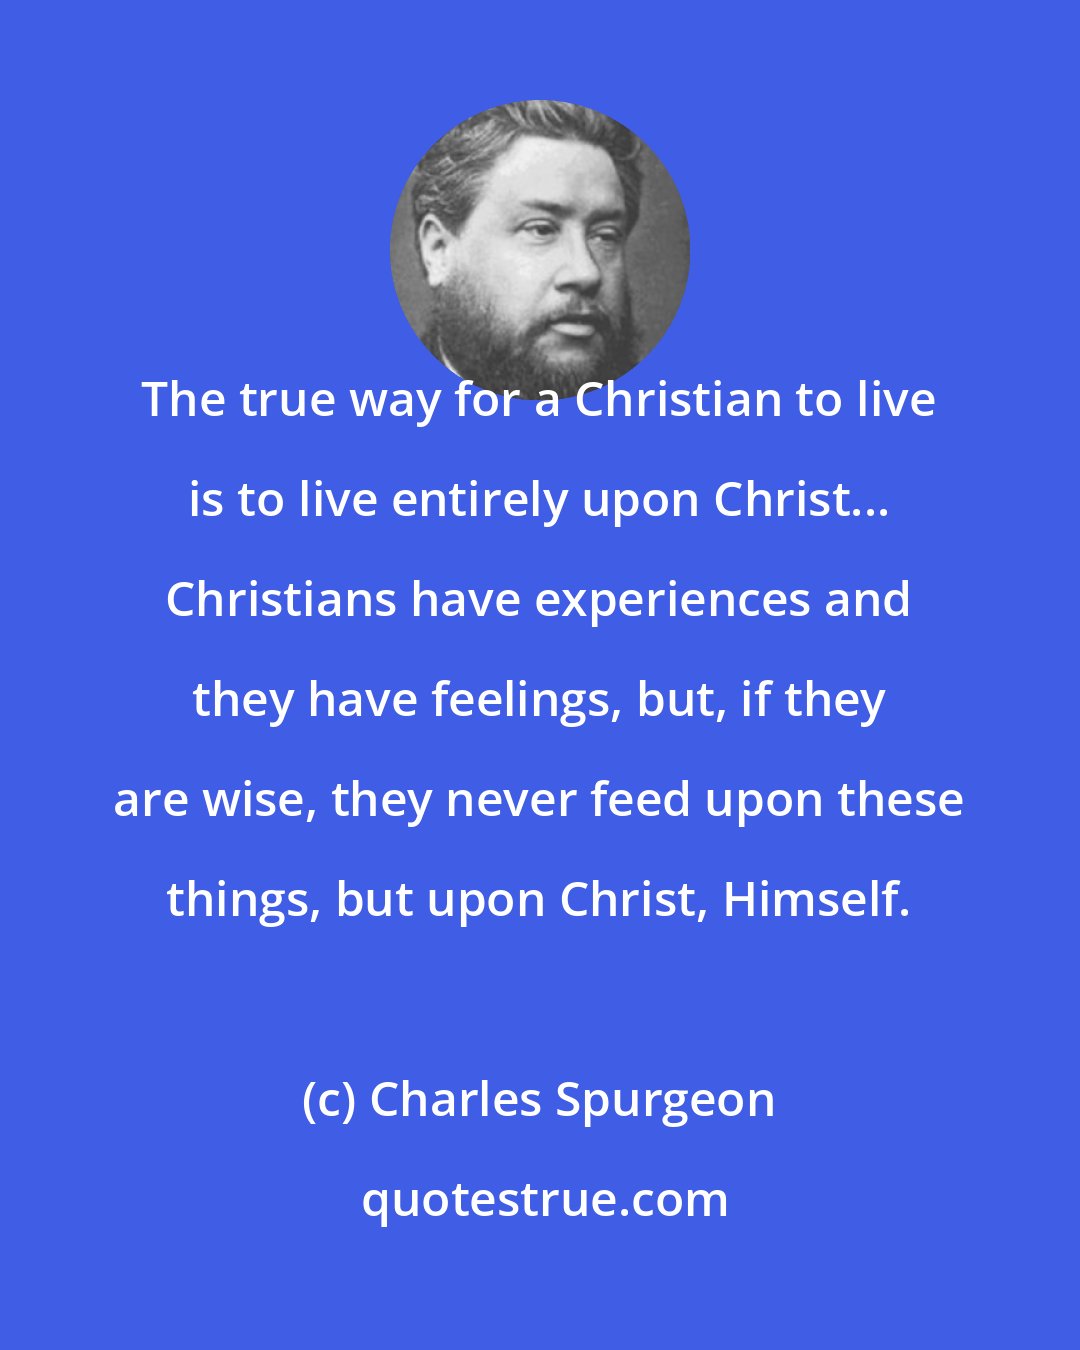 Charles Spurgeon: The true way for a Christian to live is to live entirely upon Christ... Christians have experiences and they have feelings, but, if they are wise, they never feed upon these things, but upon Christ, Himself.